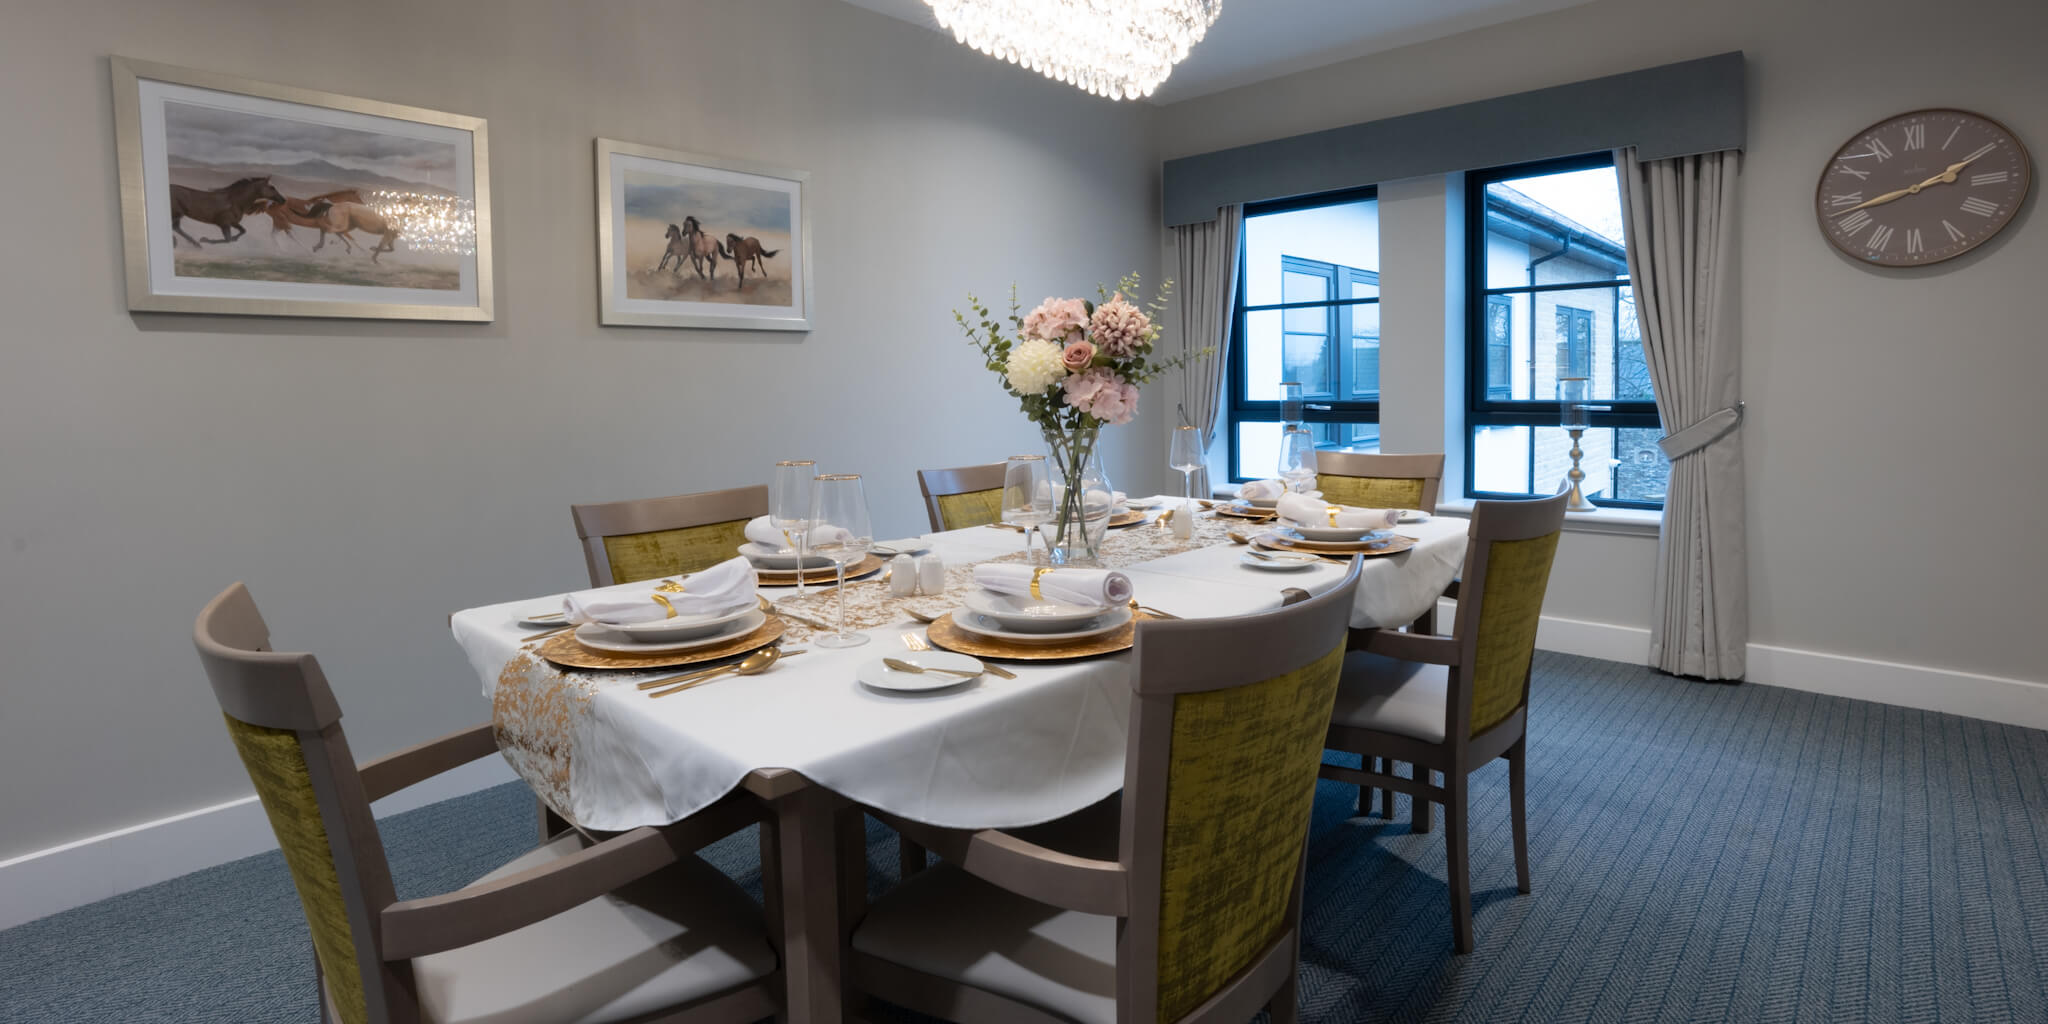 Our Private Dining Room at Rowan Park Care Home